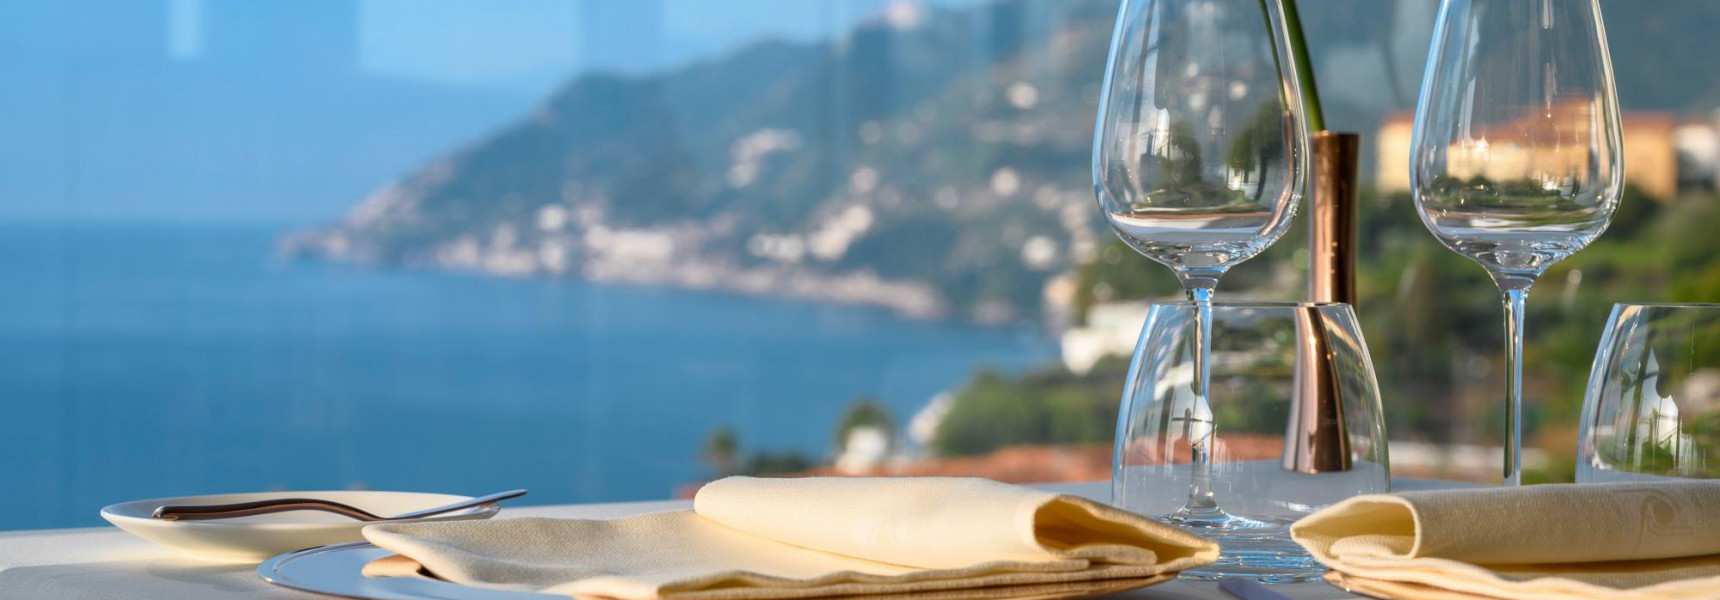 Where to Find the Best Restaurants in Naples